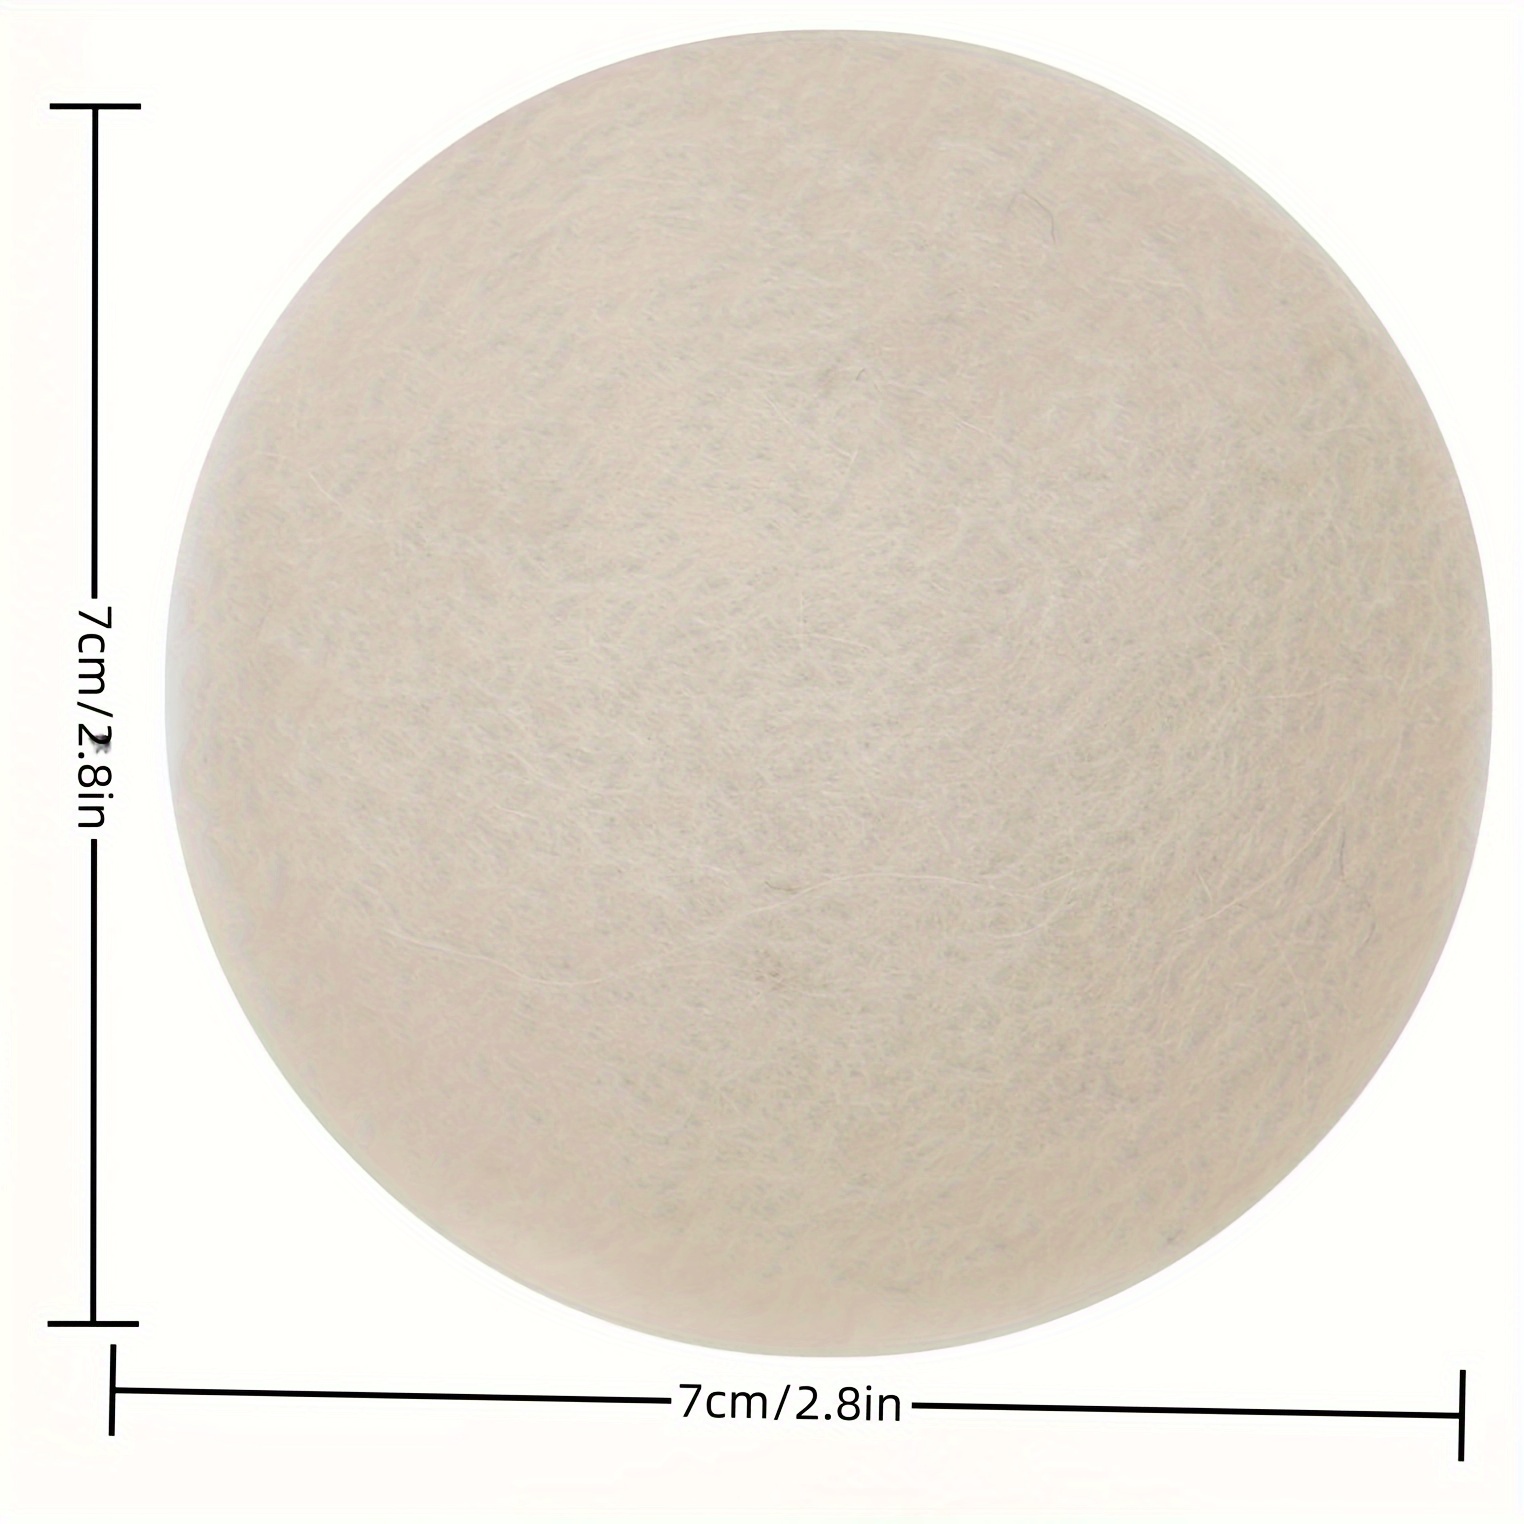 Wool Dryer Balls - Natural Fabric Softener, Reusable, Reduces